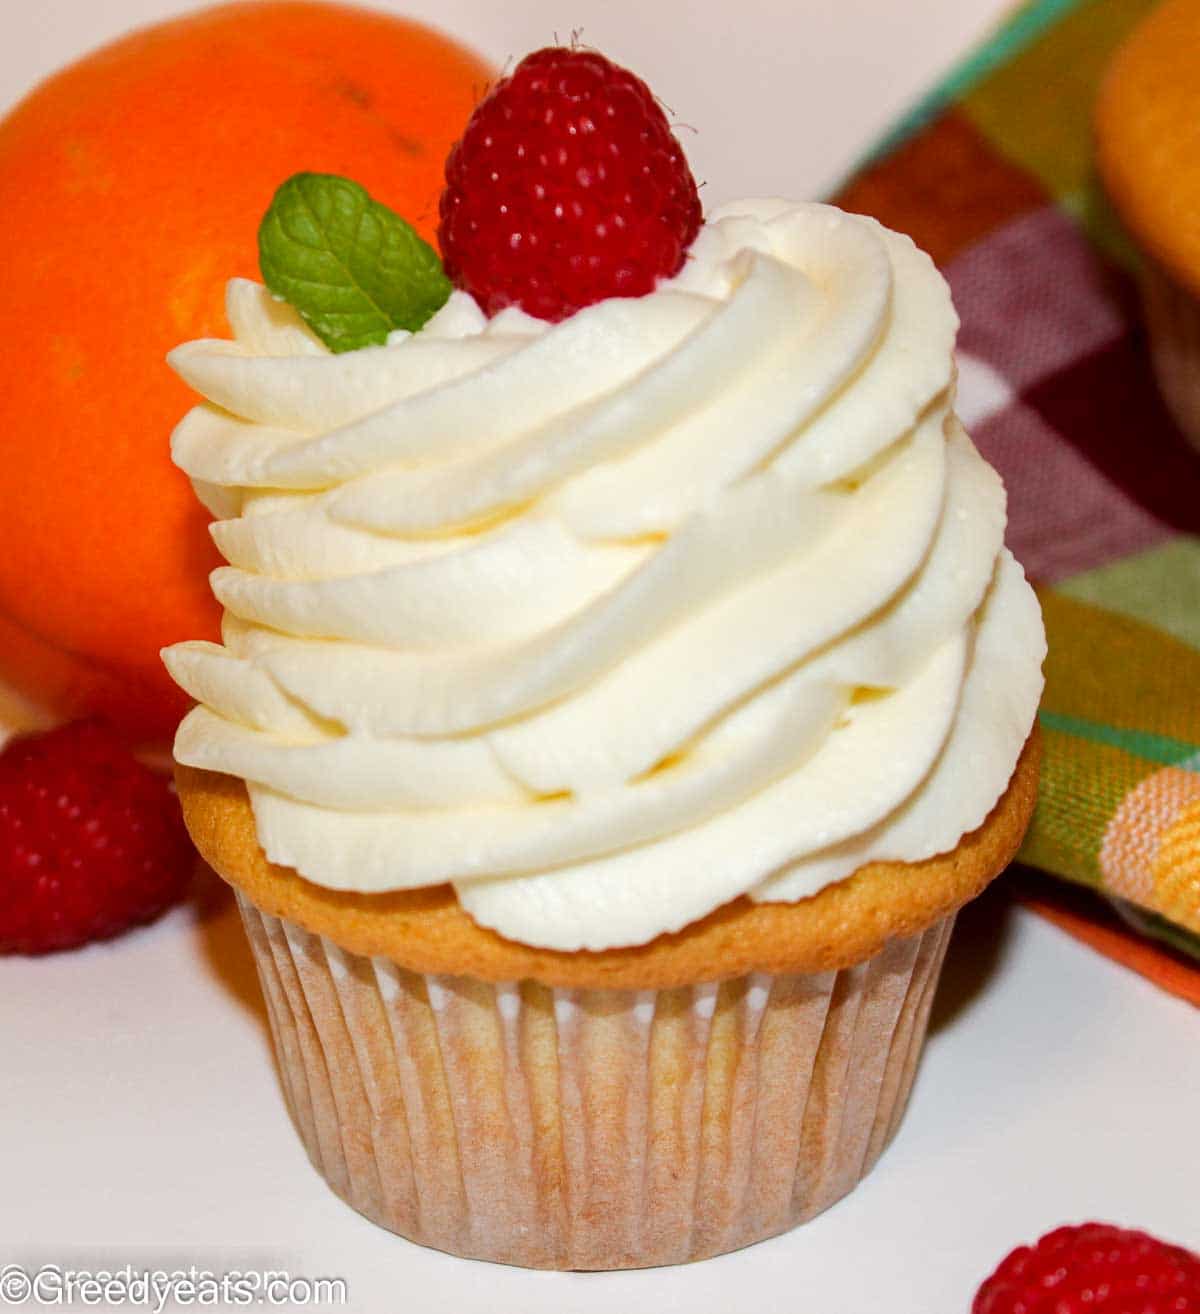 Orange Cupcake with piped orange buttercream frosting and a raspberry on top.